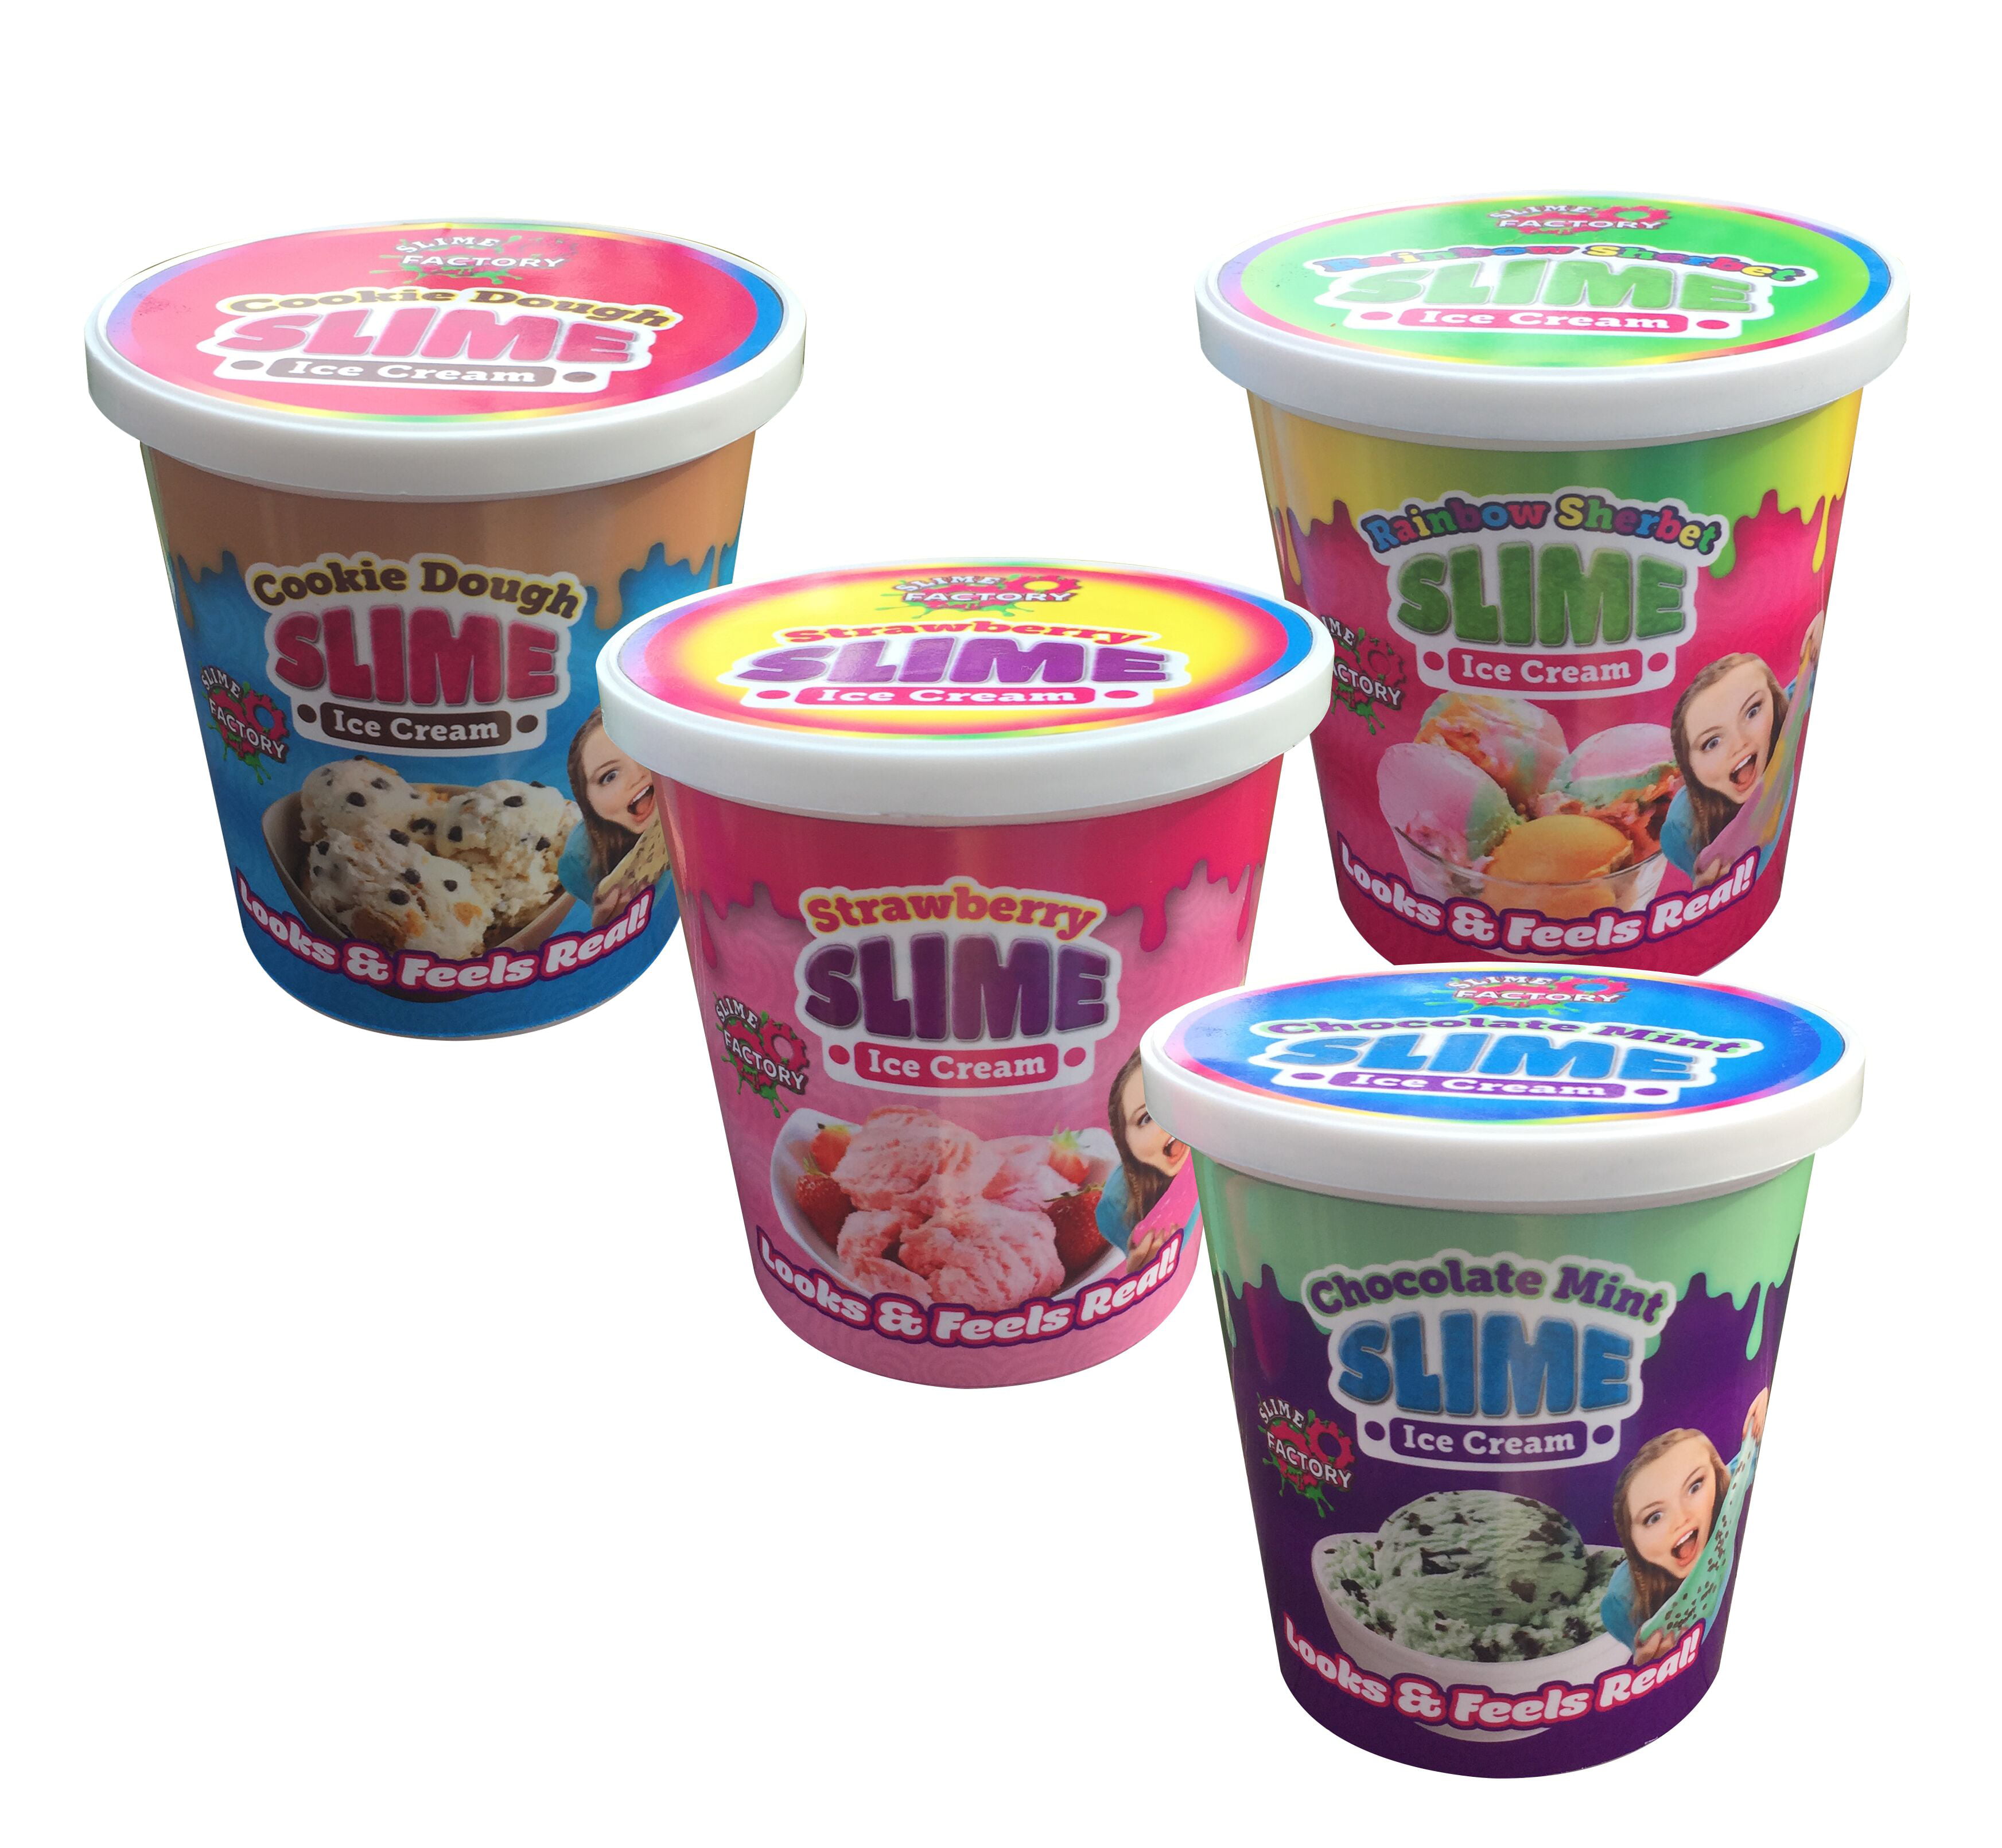 Buy Slim Factory Ice Cream Slime Cookie Dough and Mint